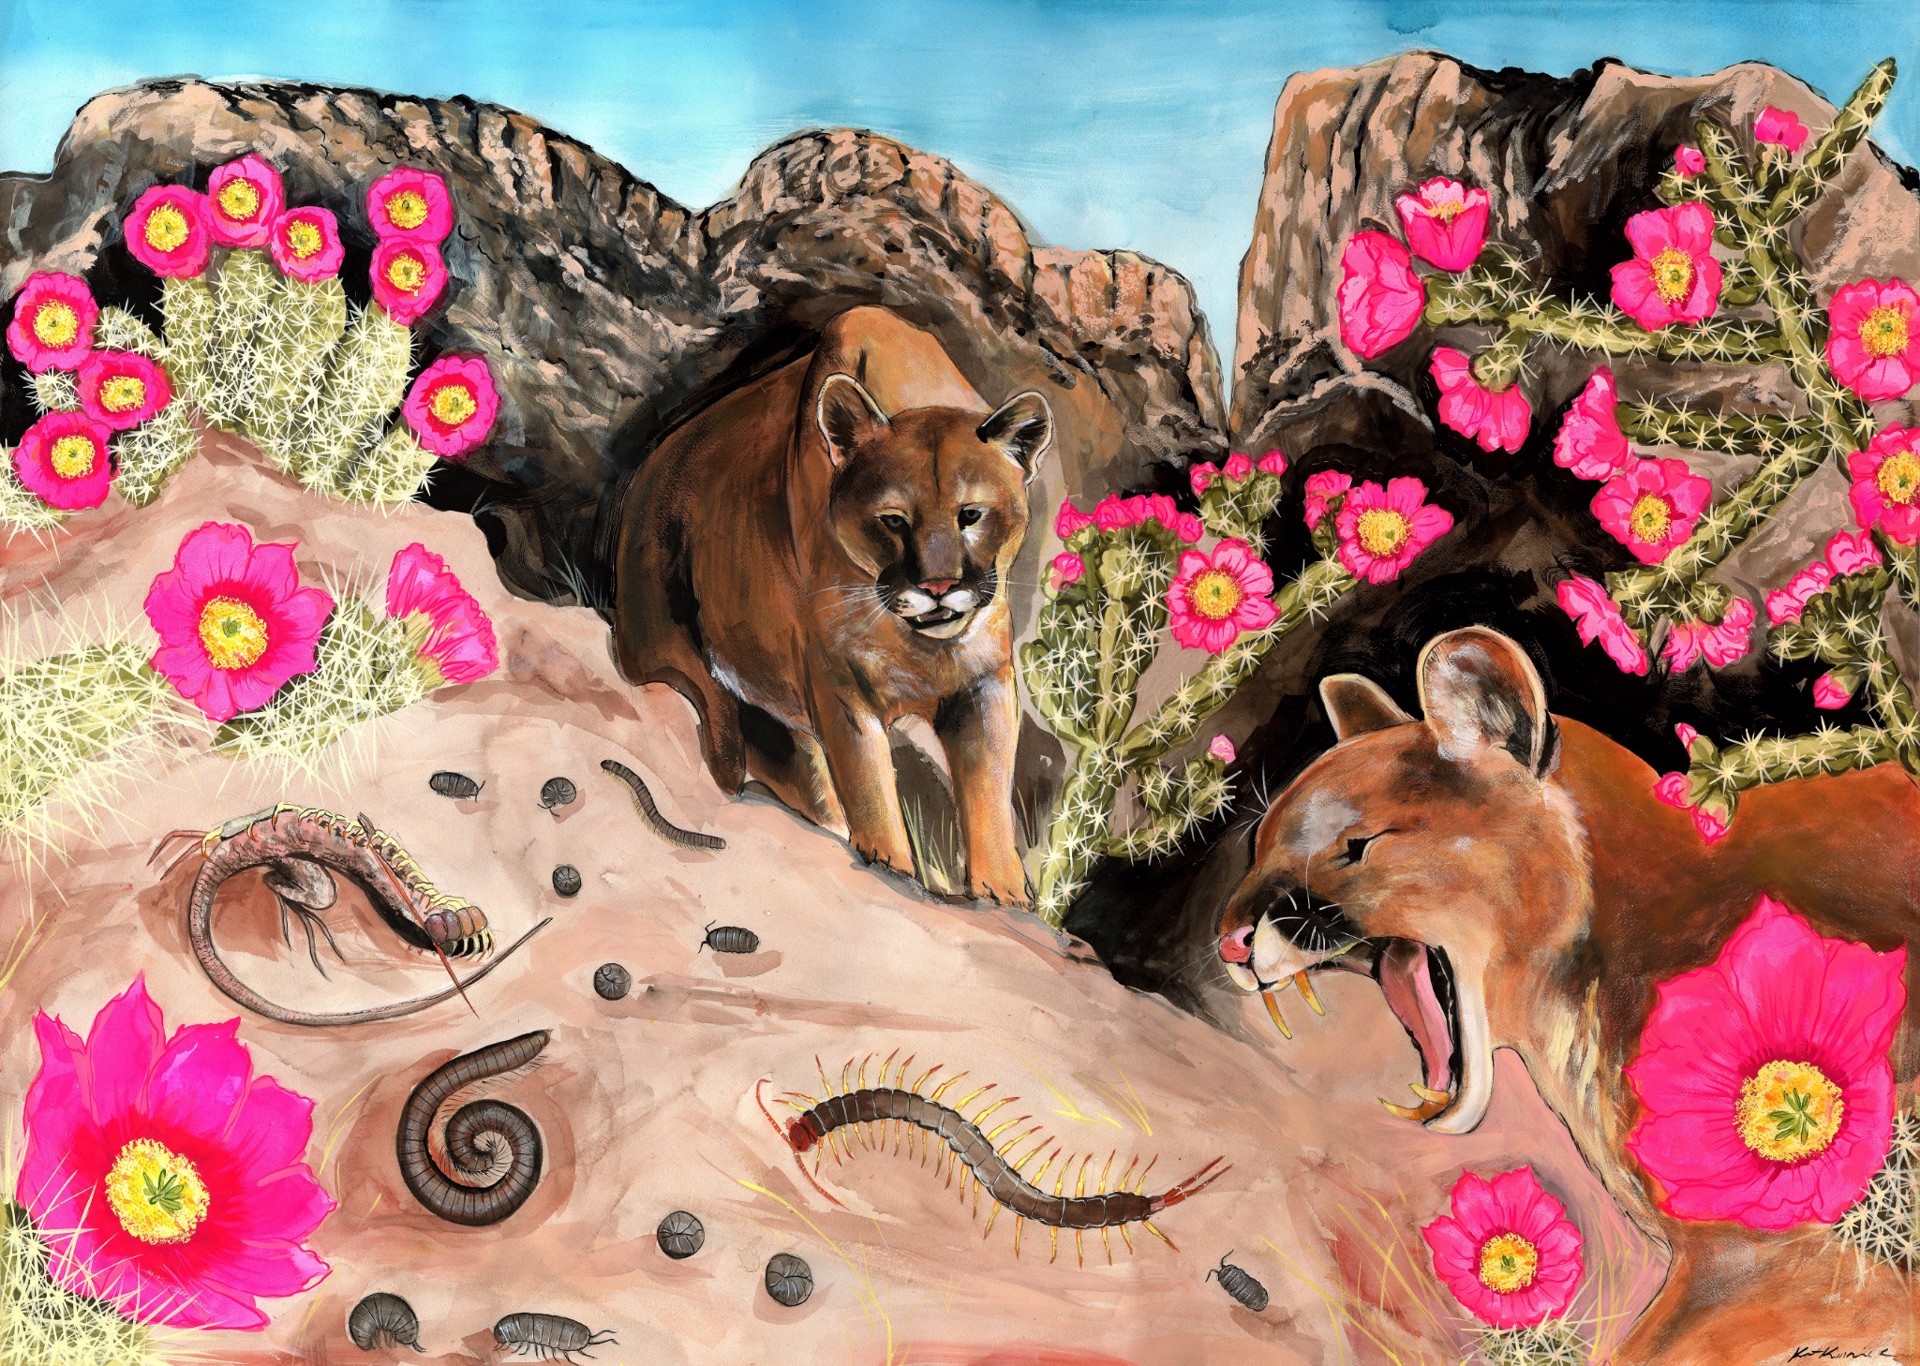 Cougars in Diablo Canyon by Kat Kinnick